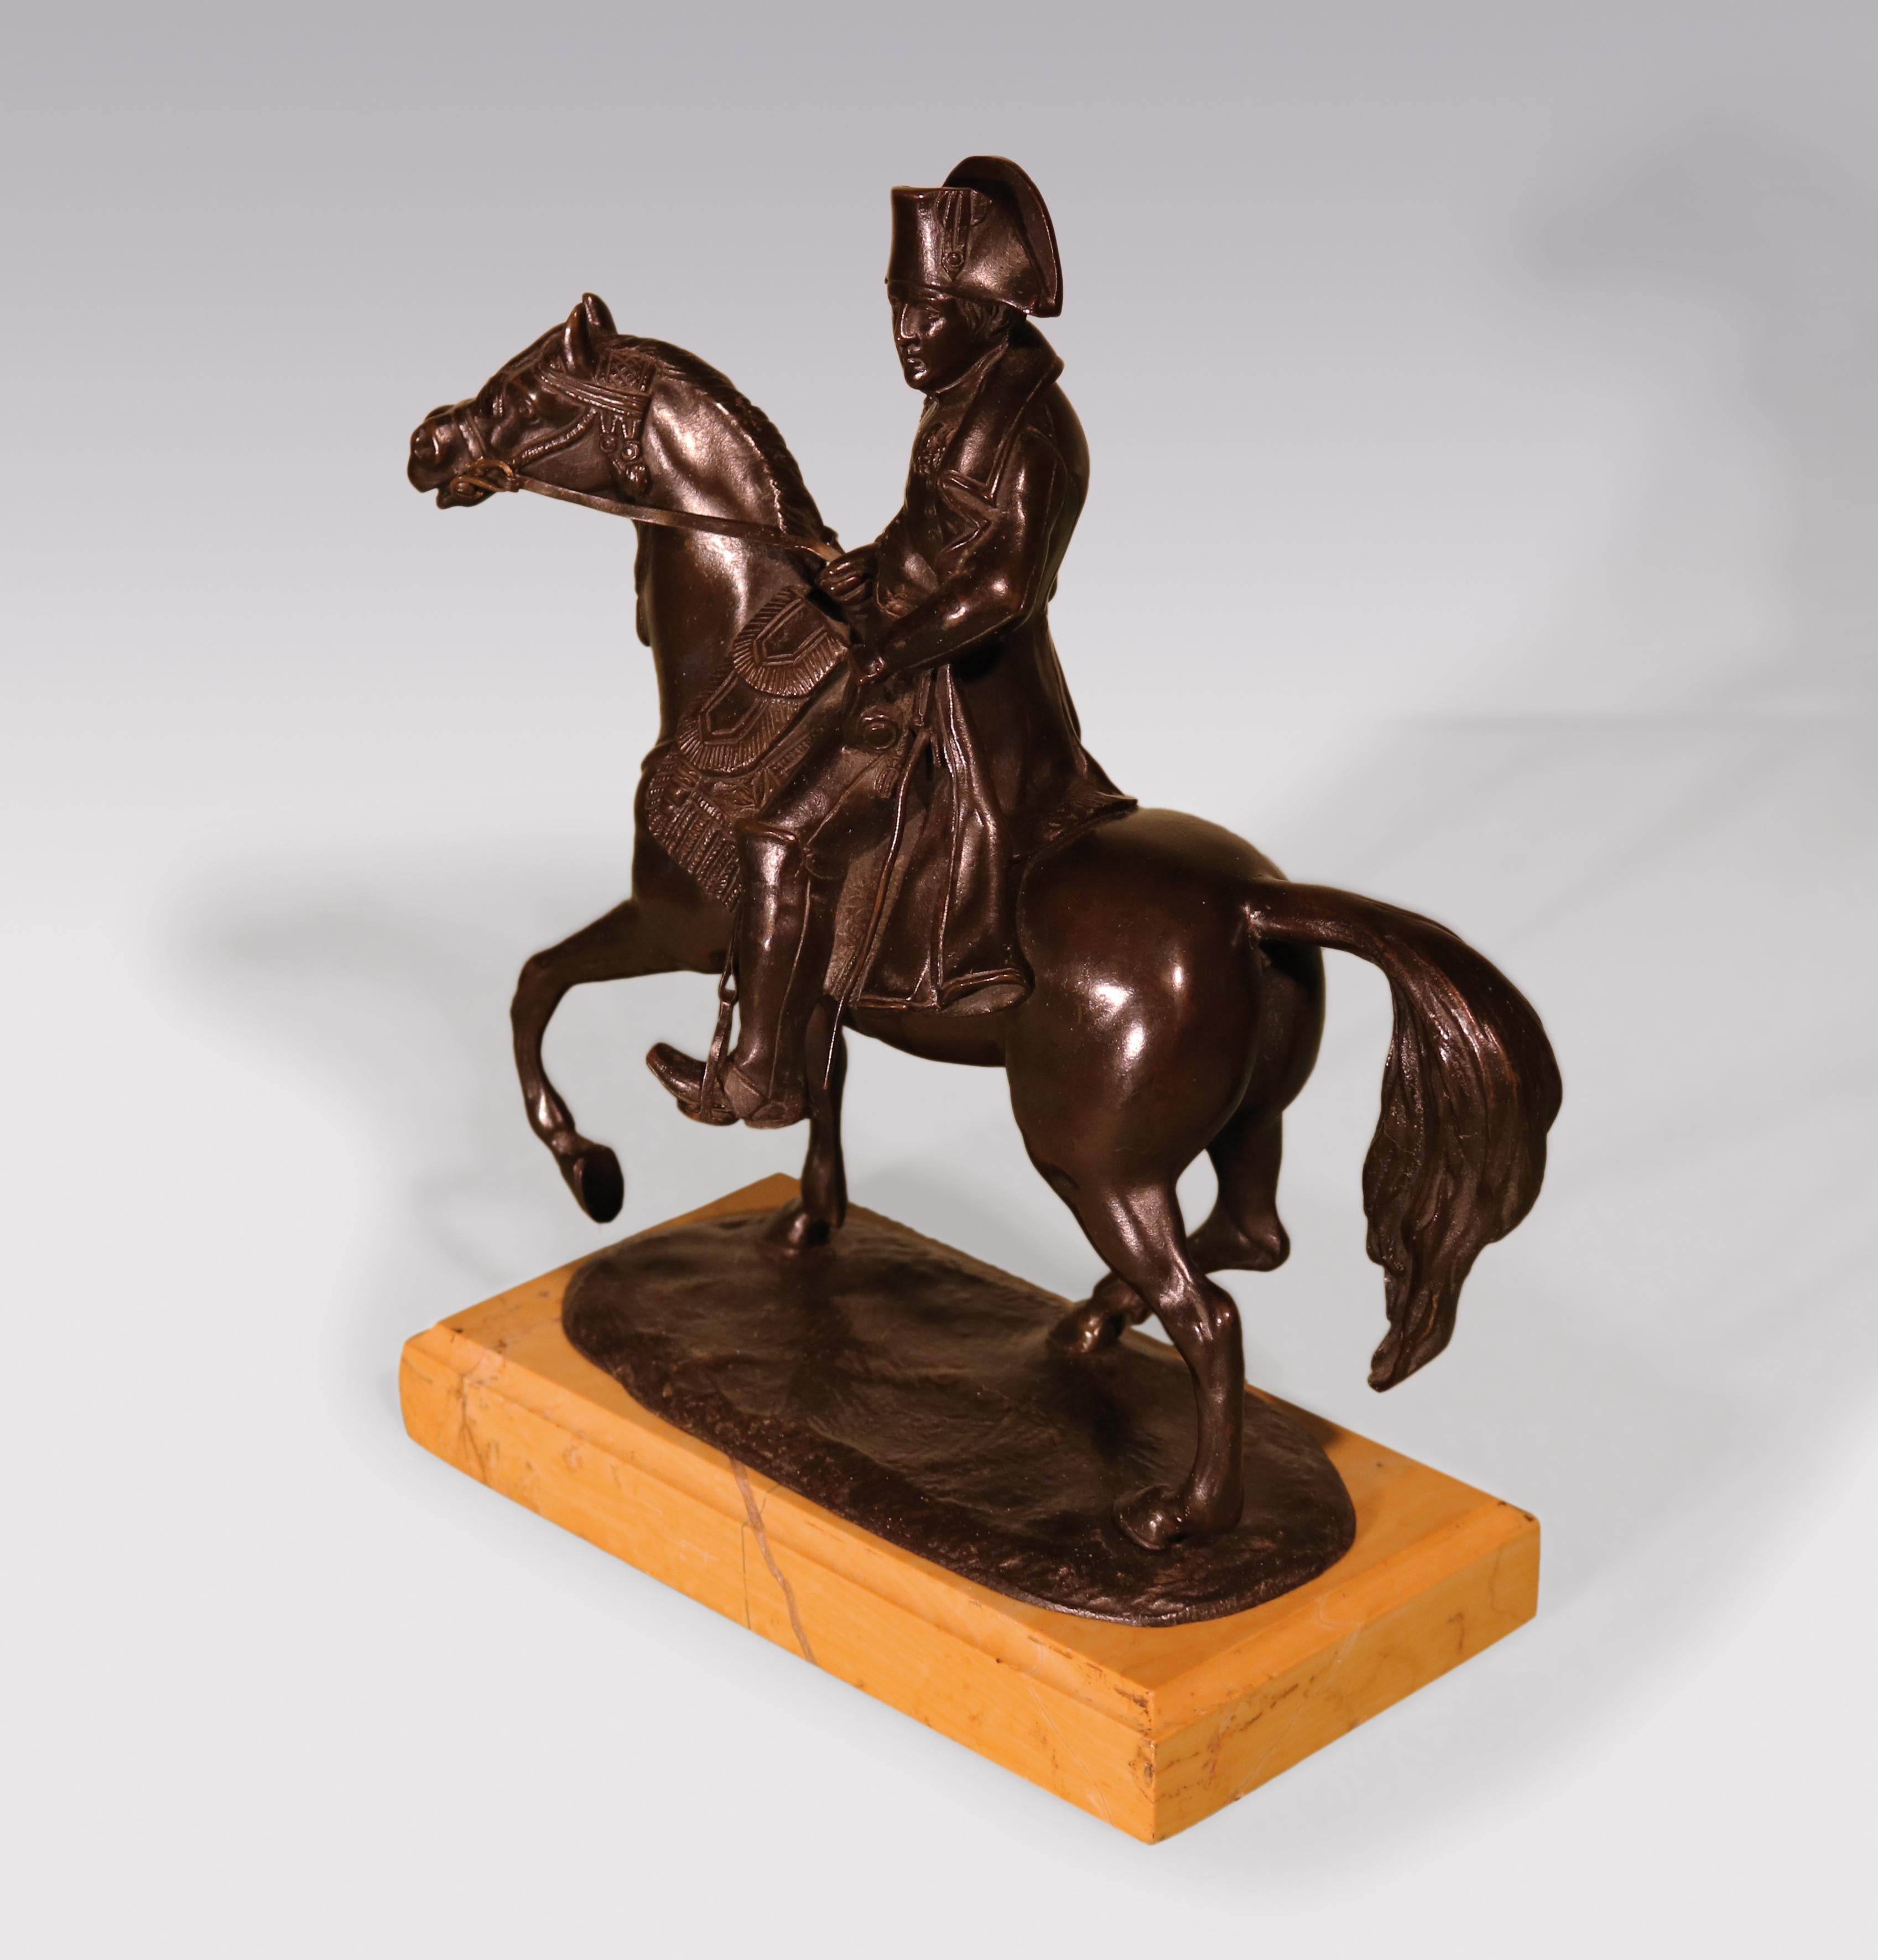 An early 19th century well-cast detailed bronze of Napoleon riding his famous horse Marengo supported on moulded Sienna marble base.